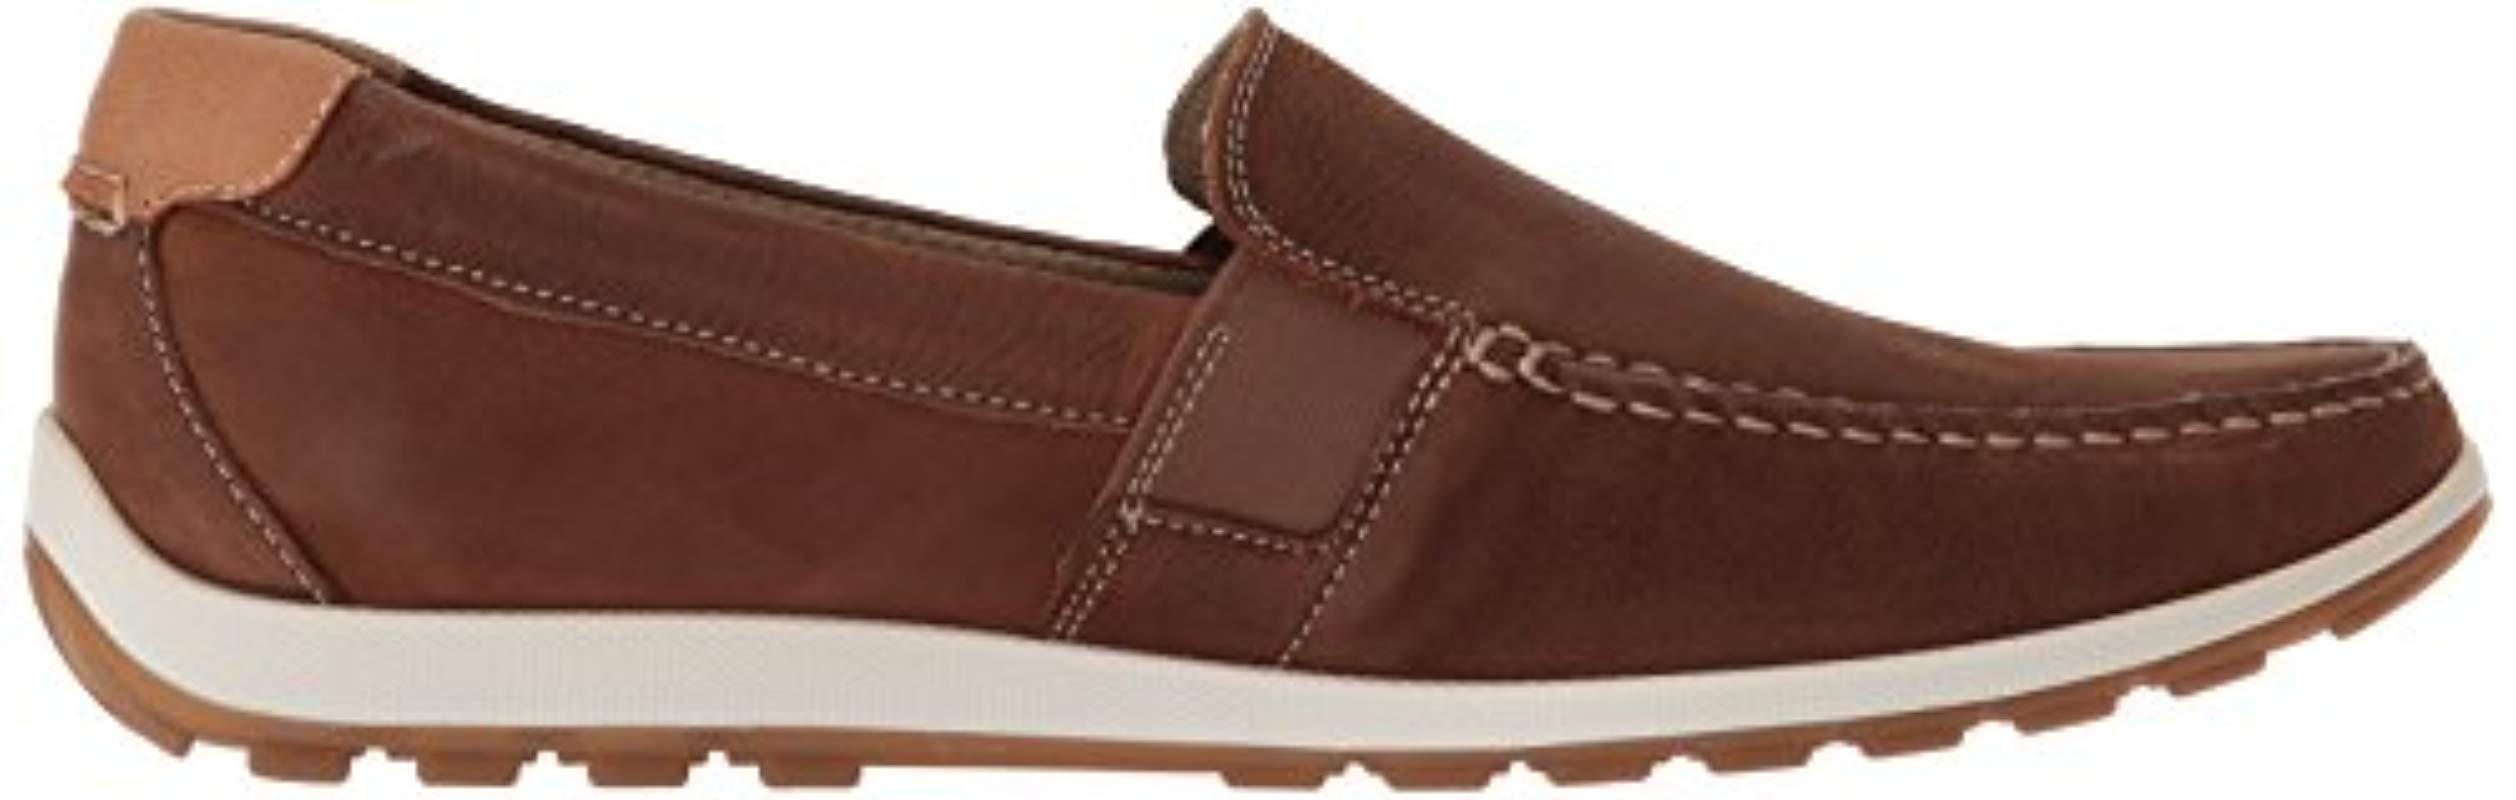 Ecco Leather Dip Moc Moccasin in Mahogany (Brown) for Men - Save 36% - Lyst